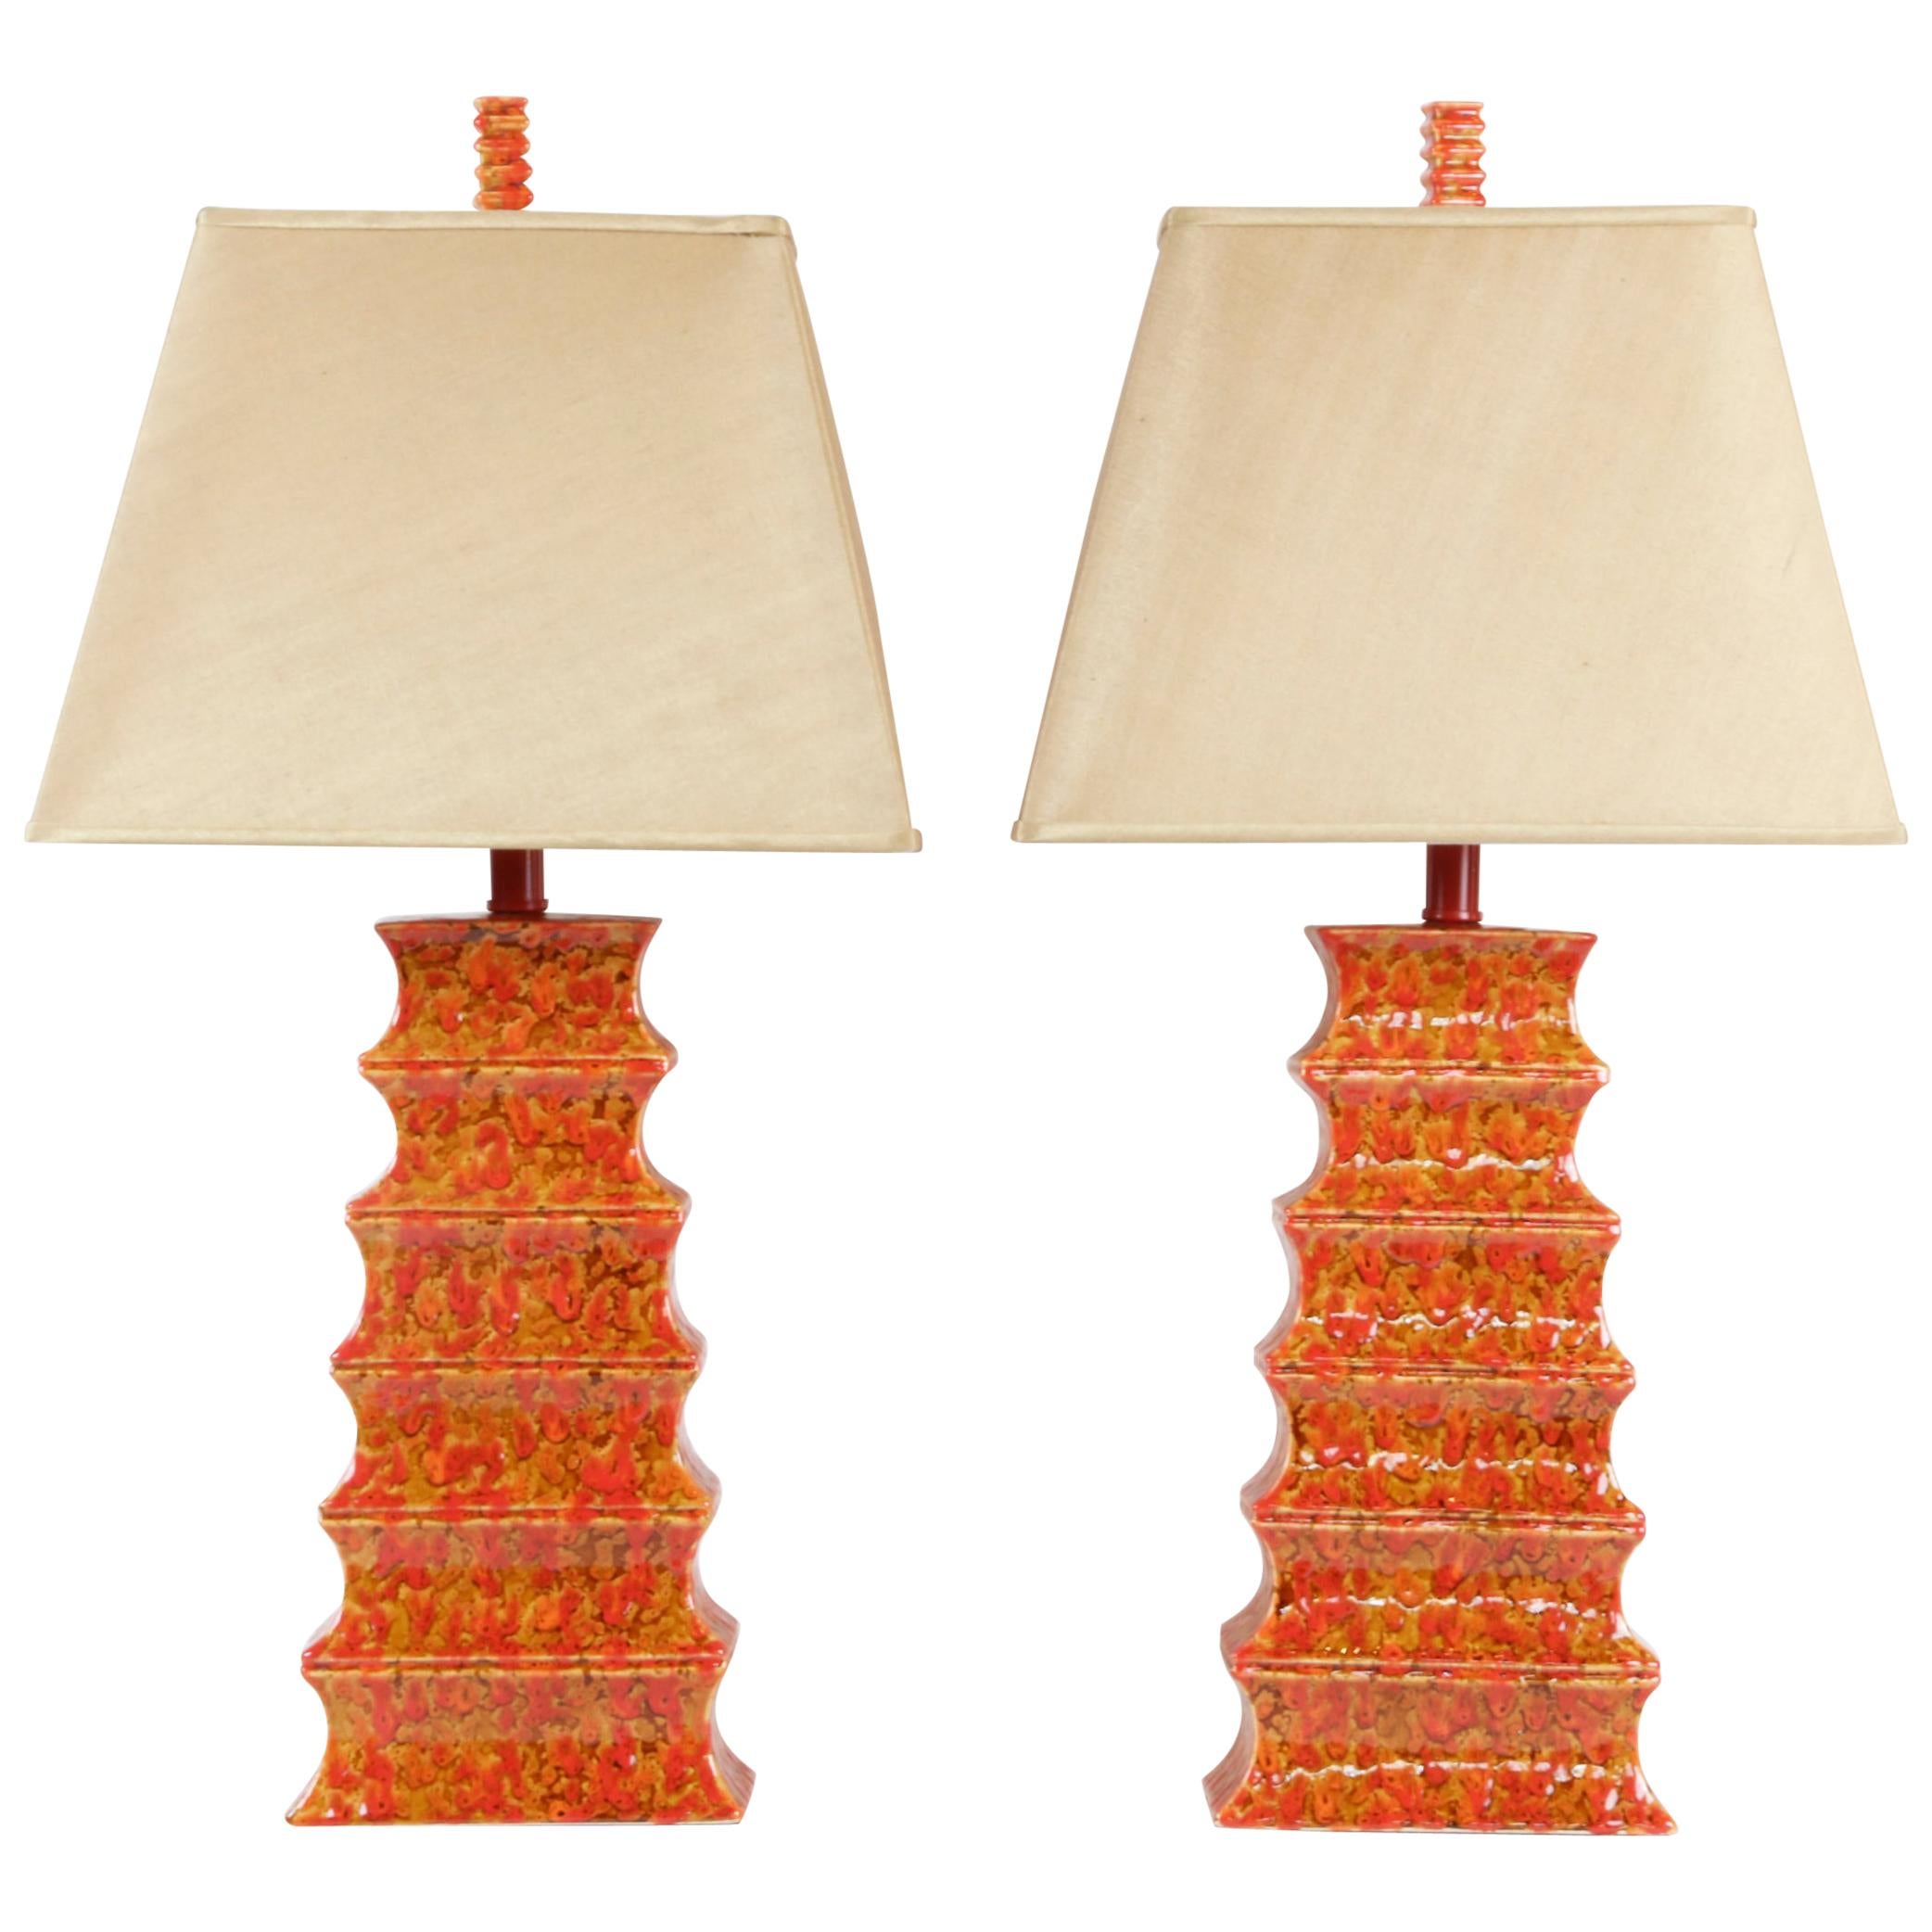 Pair of Midcentury Pagoda Style Lamps